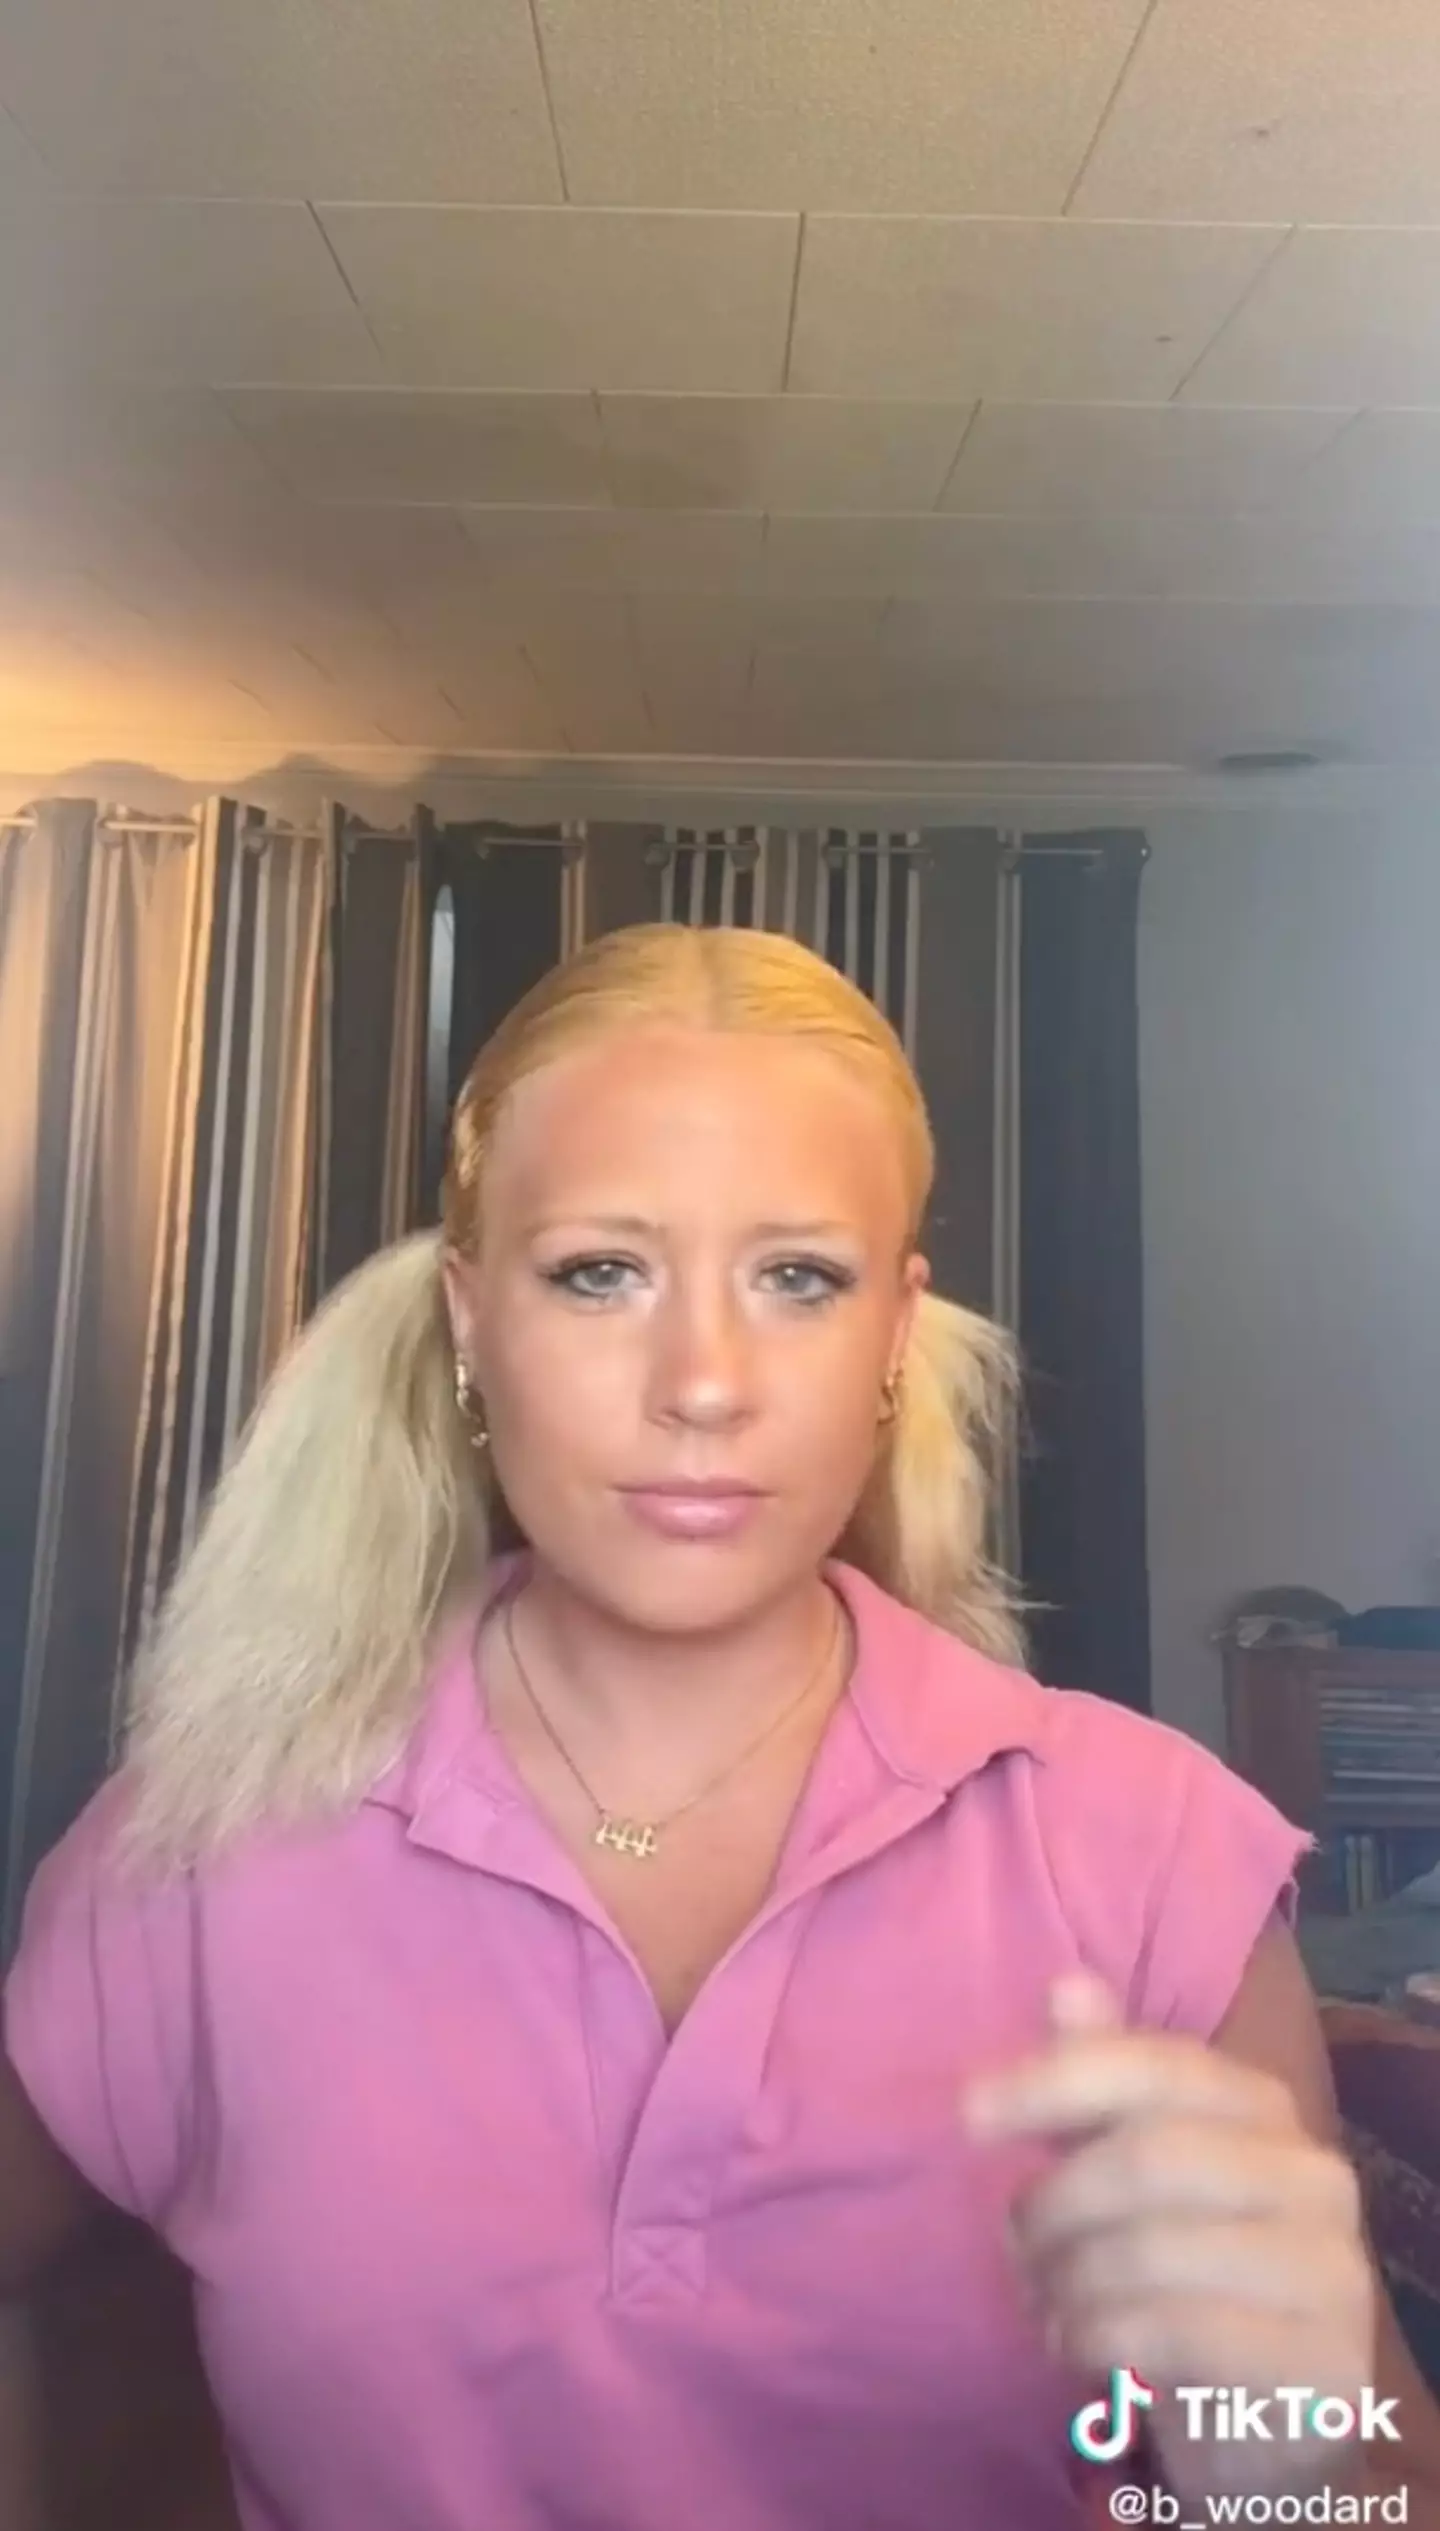 Another content creator, Bella, got a $50 tip for wearing the same hairstyle.